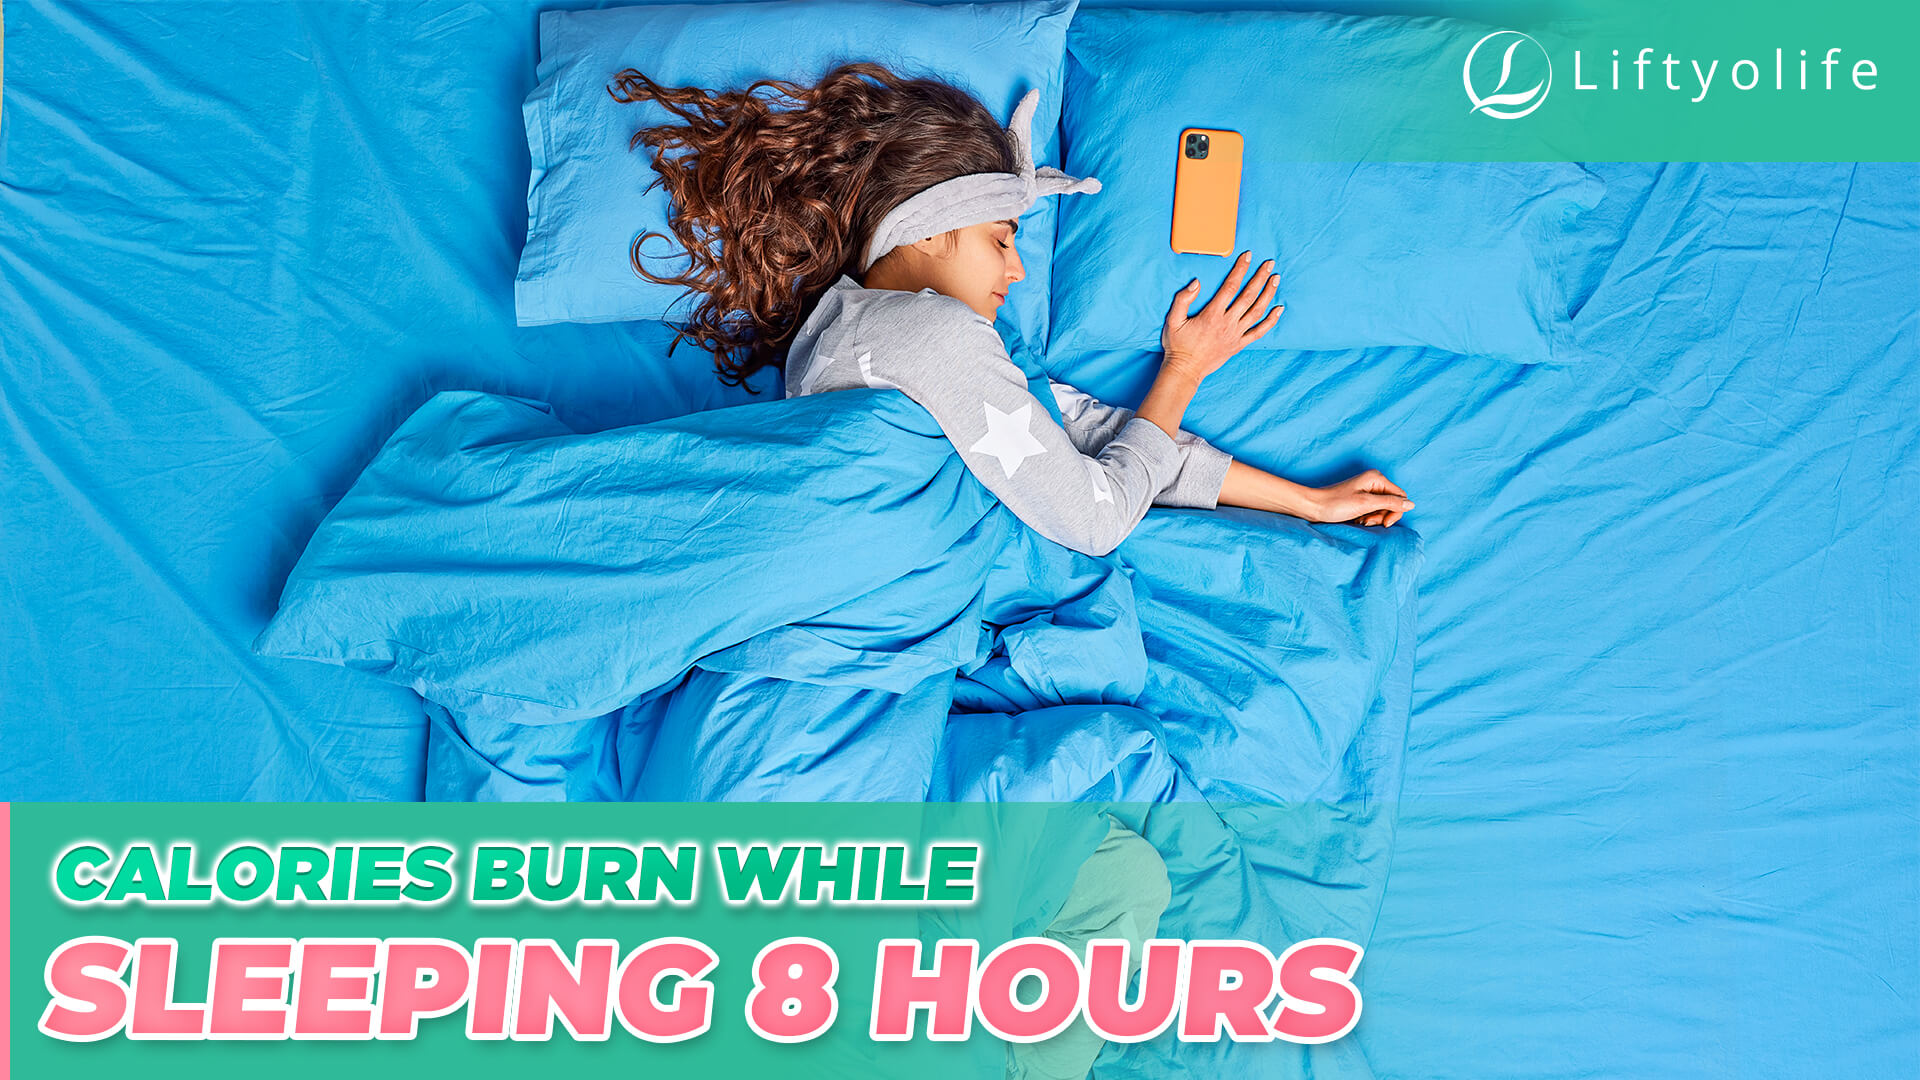 How Many Calories Do You Burn Sleeping For 8 Hours?